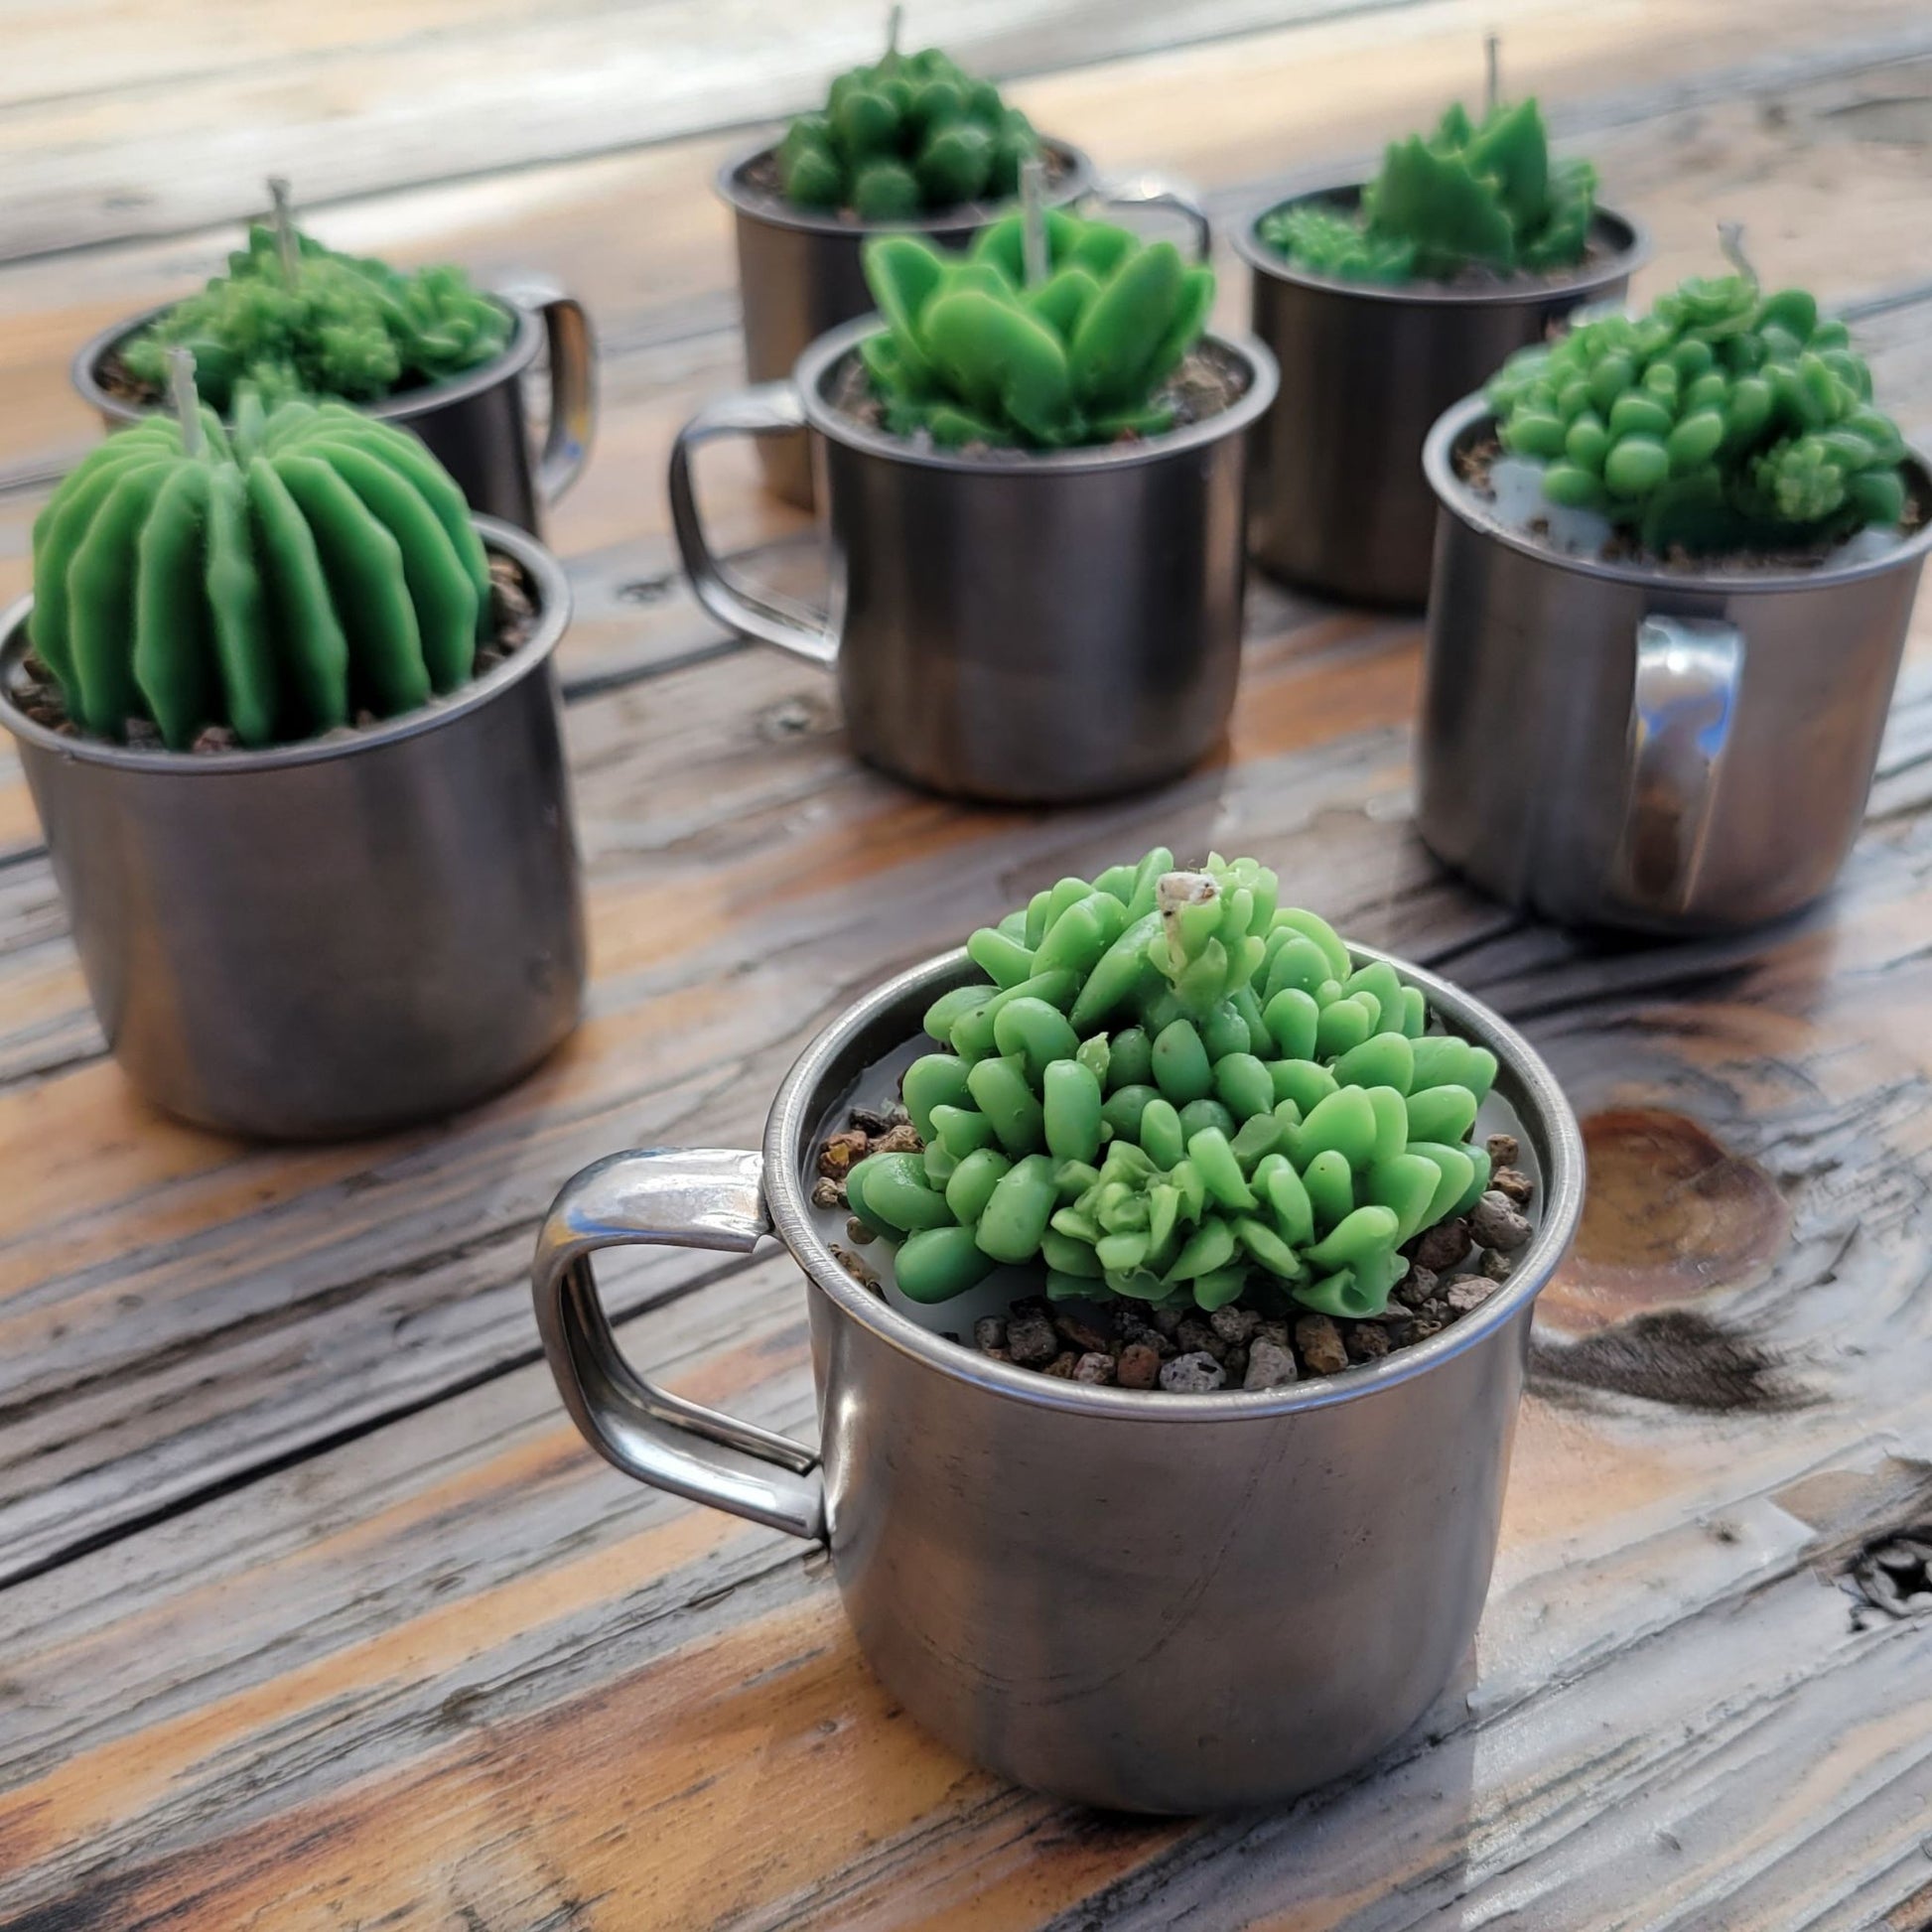 Seven handmade cactus candles in stainless steel mug.